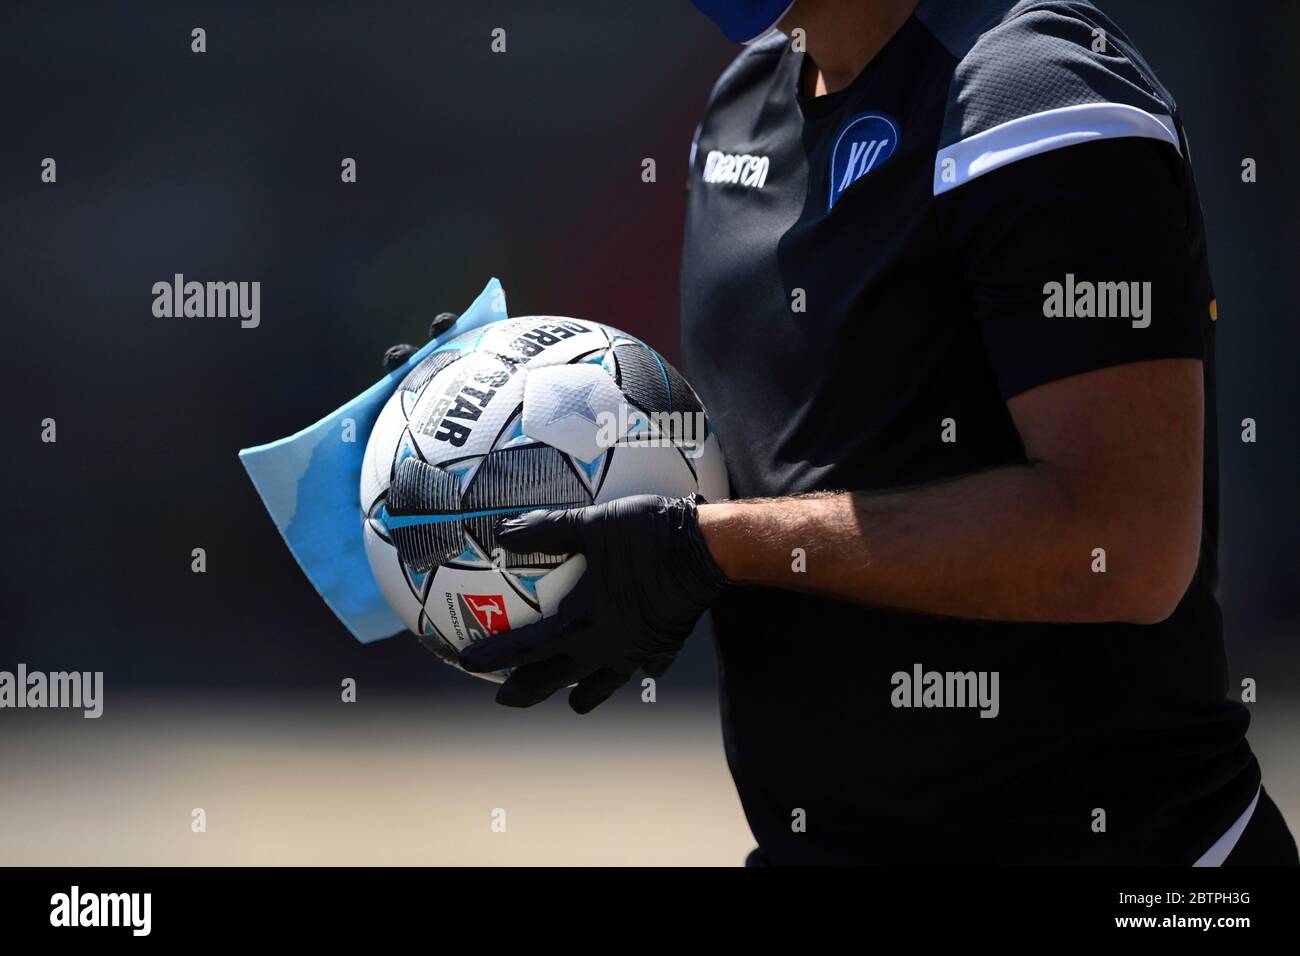 A ball boy disinfects a ball during the 2nd Bundesliga soccer match between Karlsruher SC and SV Darmstadt 98, in Karlsruhe, Germany, Saturday, May 16, 2020. Professional soccer has resumed after a two-month break in Germany with four games in the second division. Stock Photo